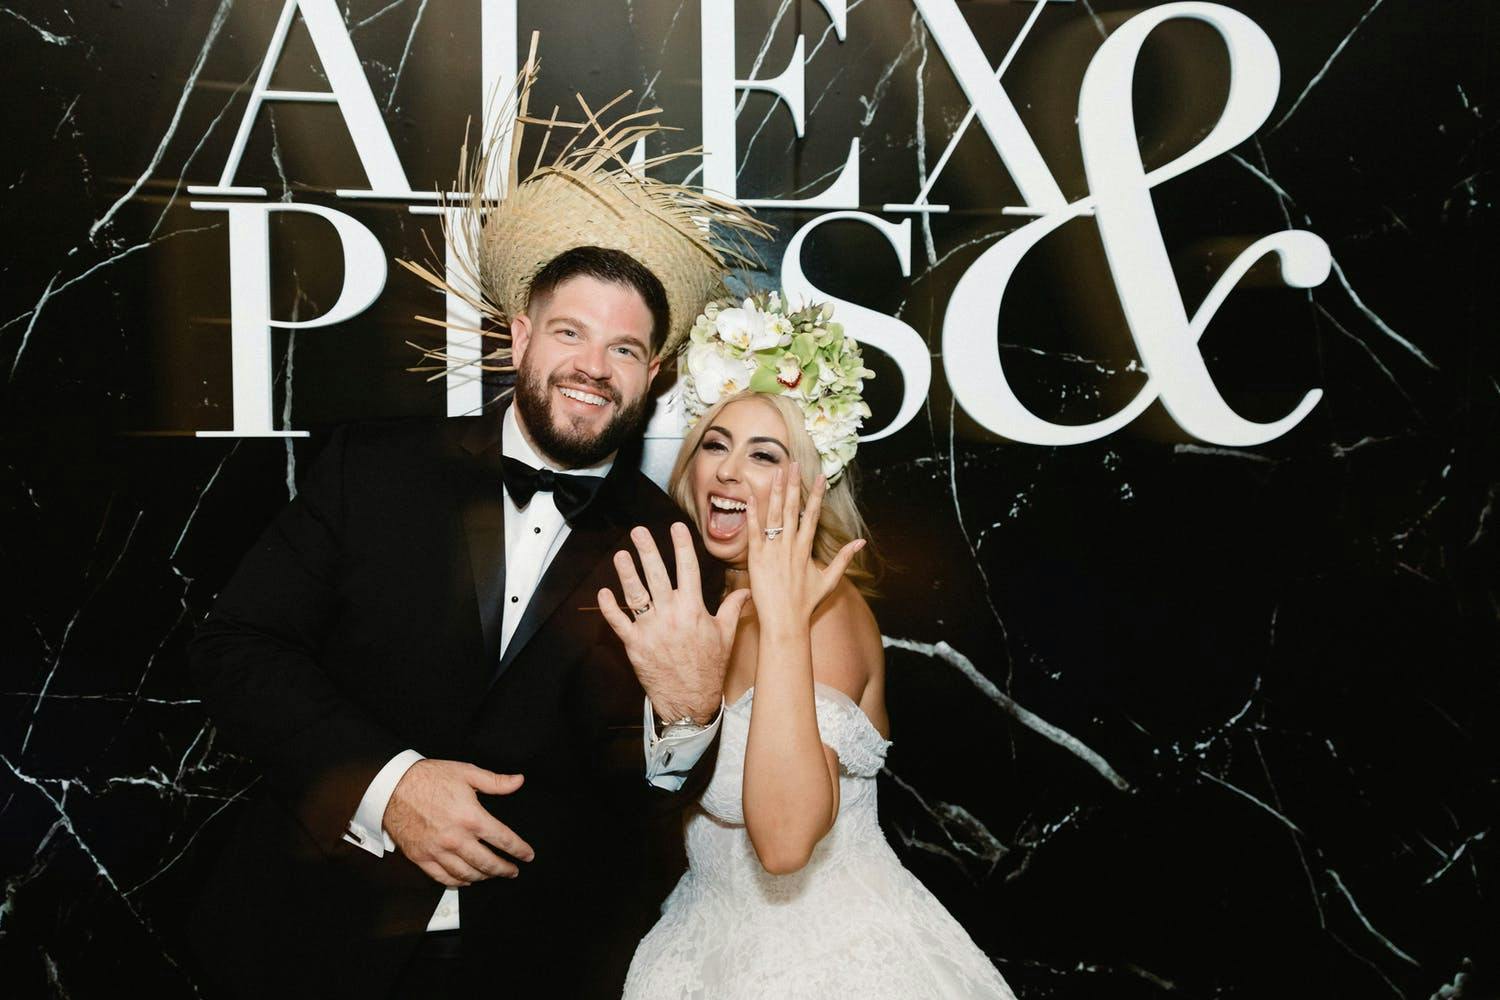 Bride and Groom Show Off Rings in Front of Marbled Black and White Backdrop With Their Names | PartySlate